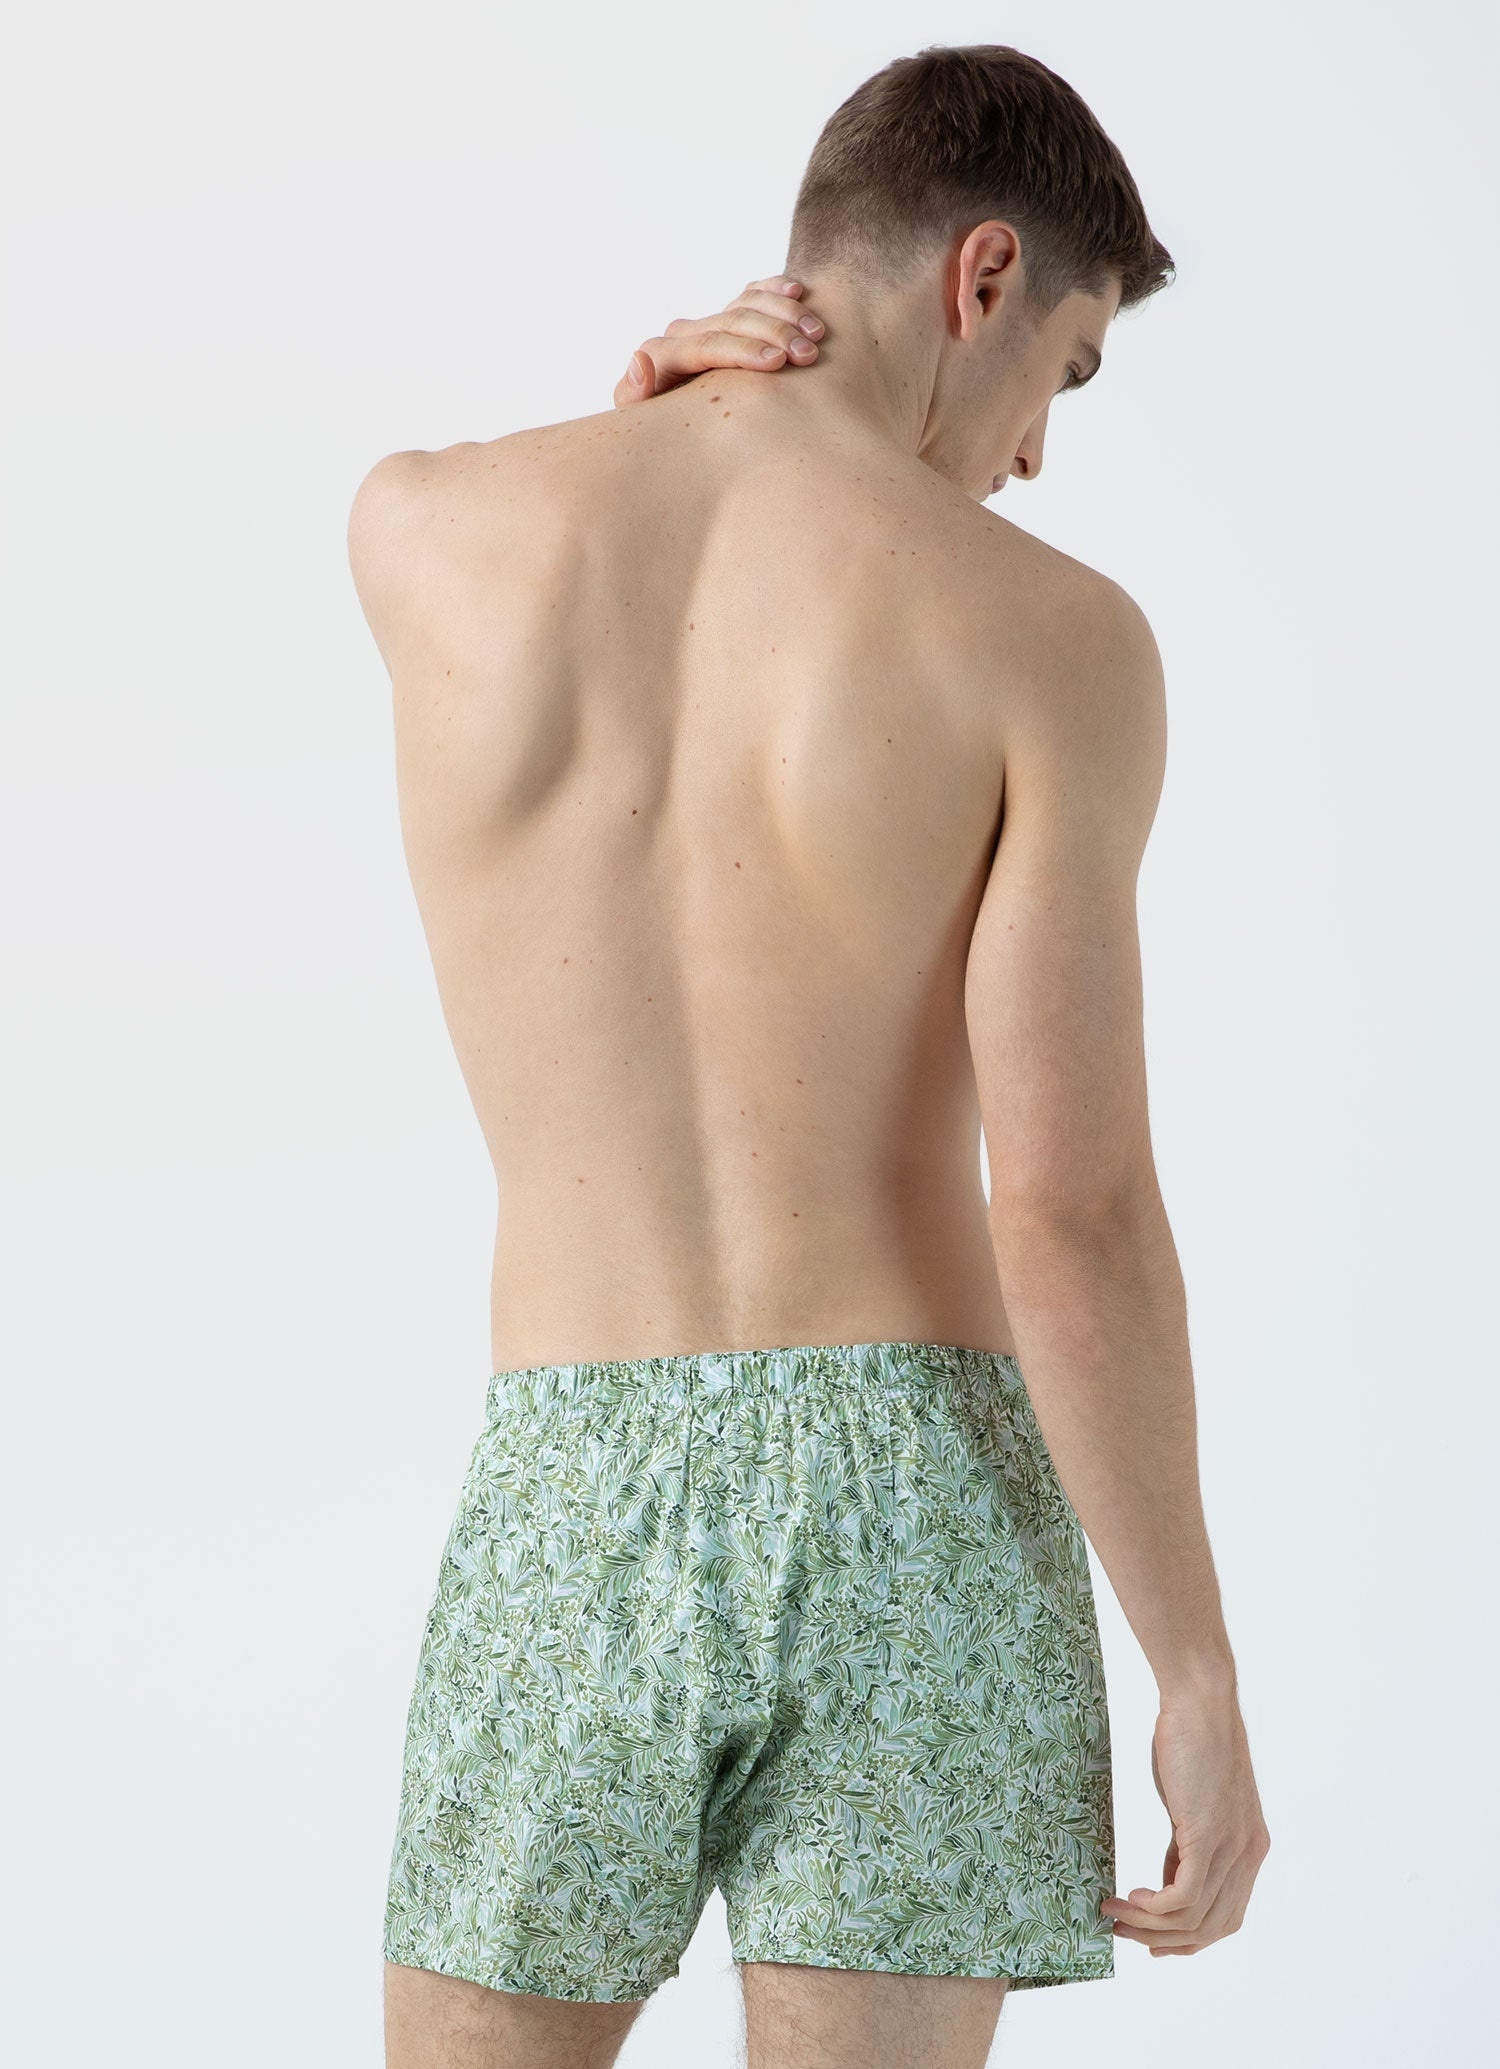 Classic Boxer Shorts in Liberty Fabric - 3